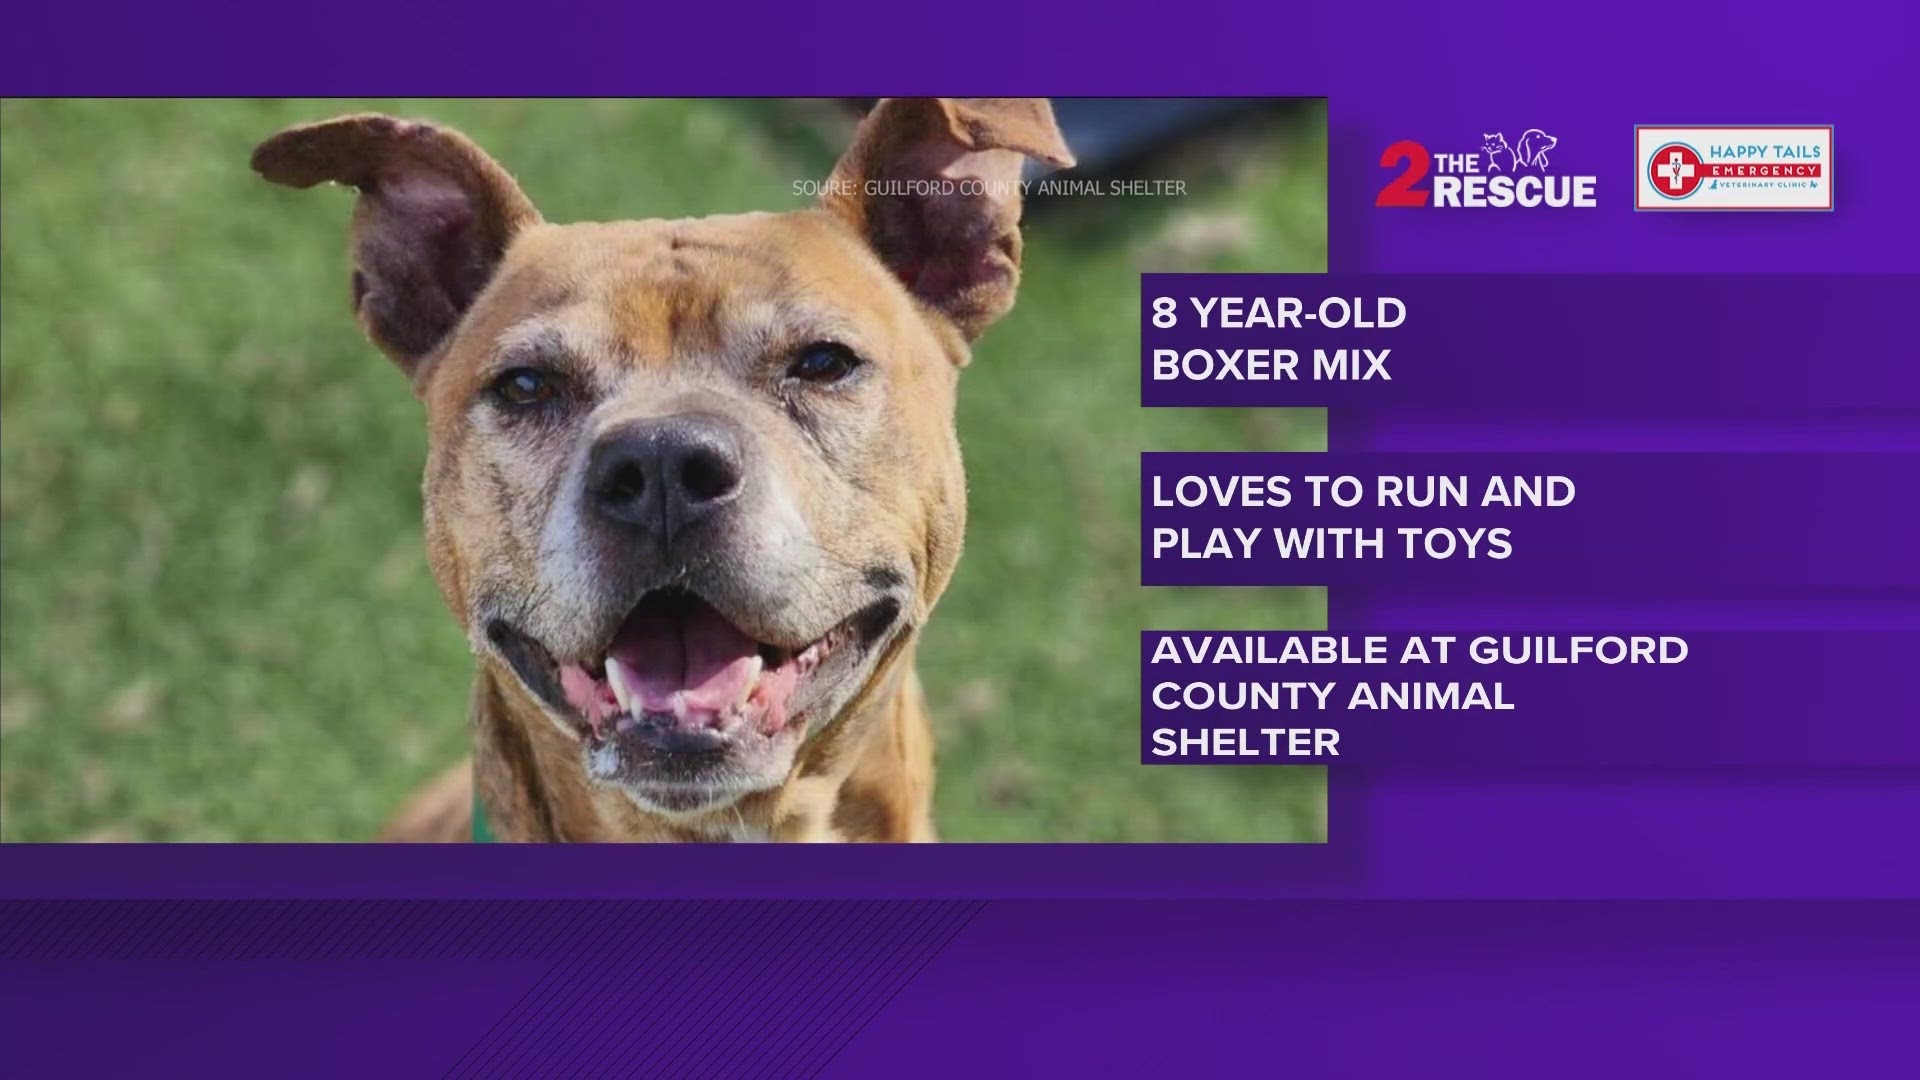 8 year-old, boxer mix, Dane is a playful gentleman looking for his forever home. If you are interested reach out to Guilford County Animal Shelter.